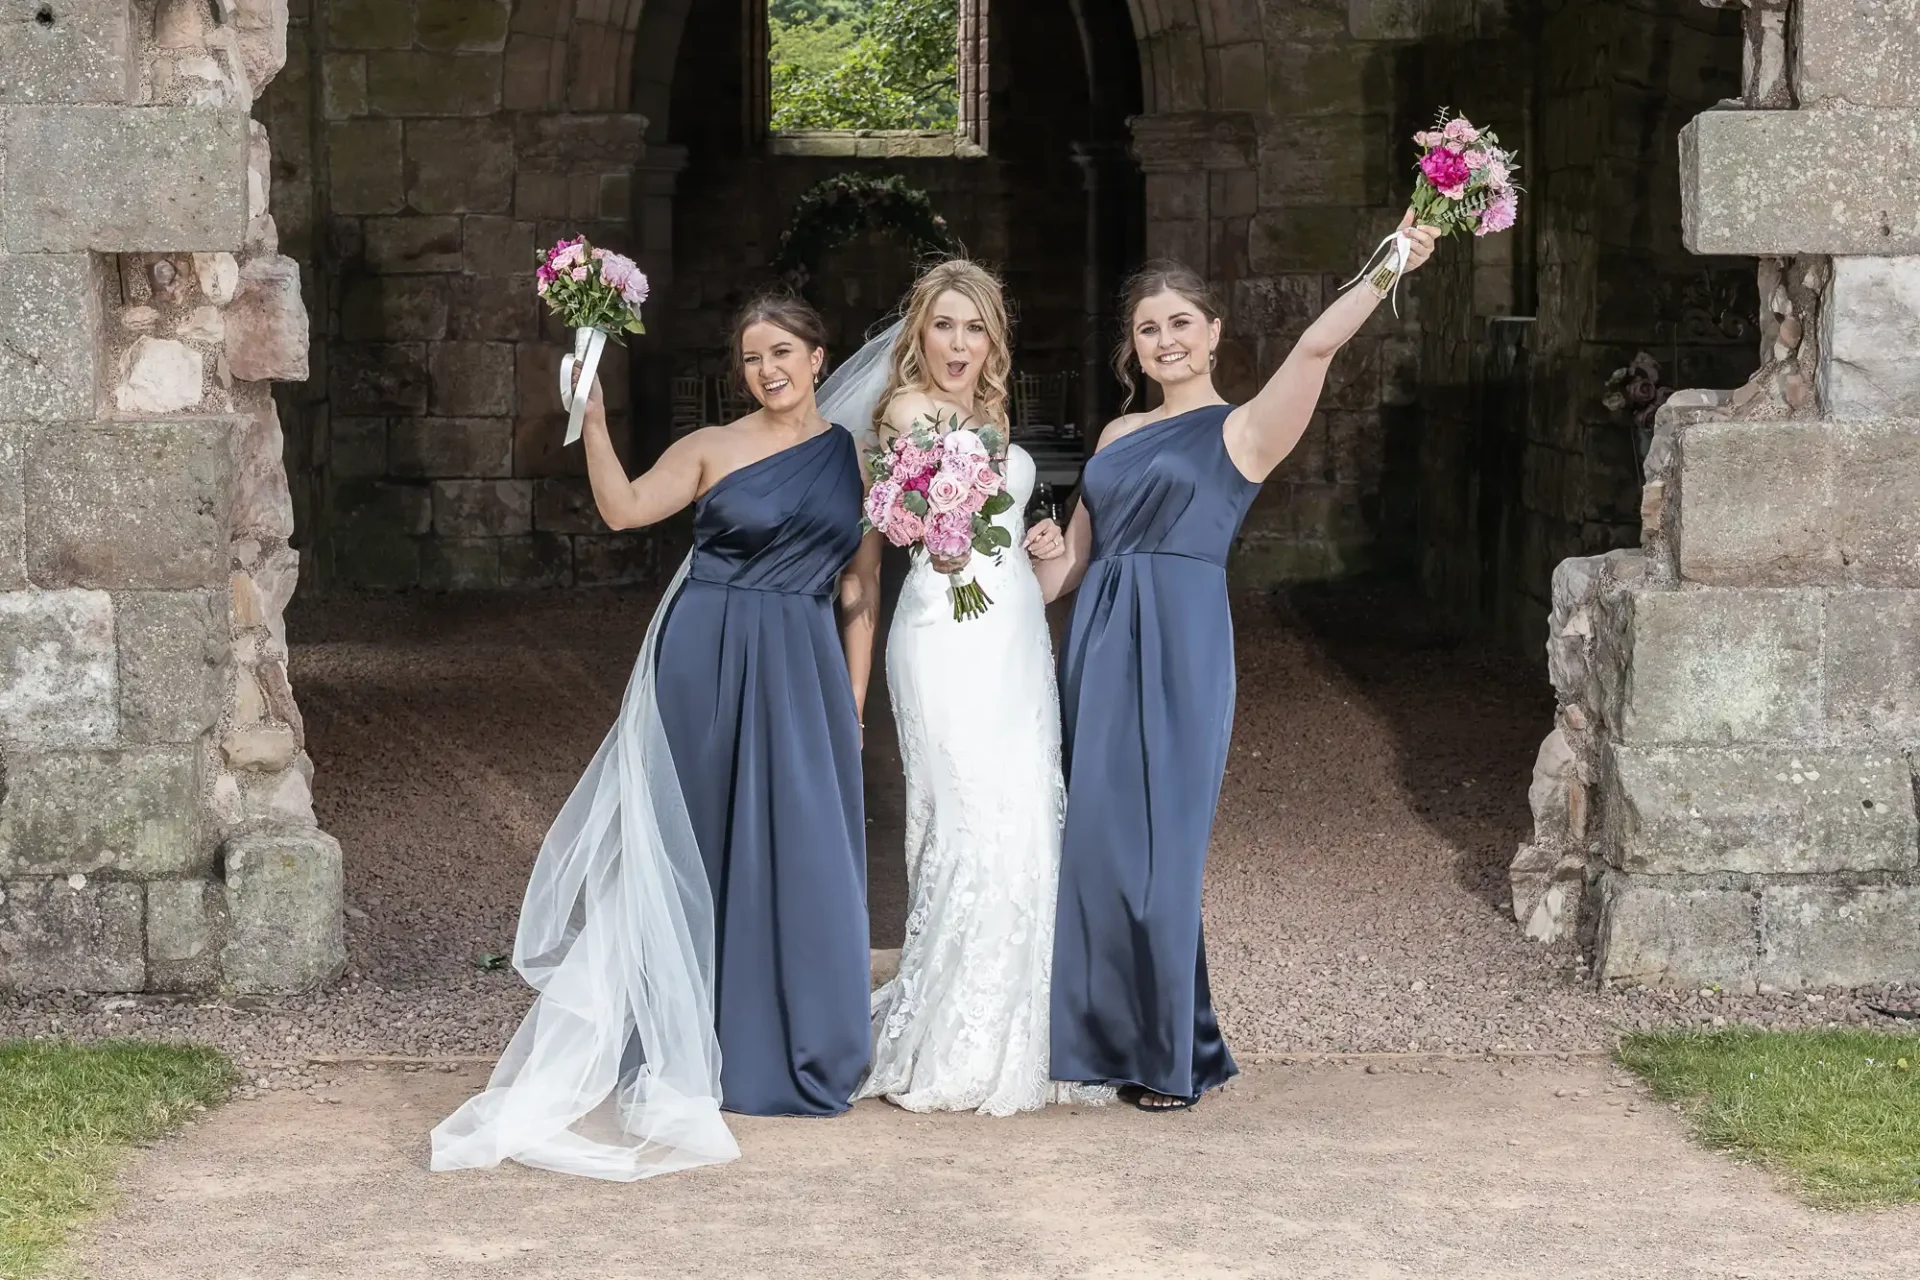 Three women in formal dresses, one in white and two in navy, holding bouquets, pose joyfully at a stone archway.